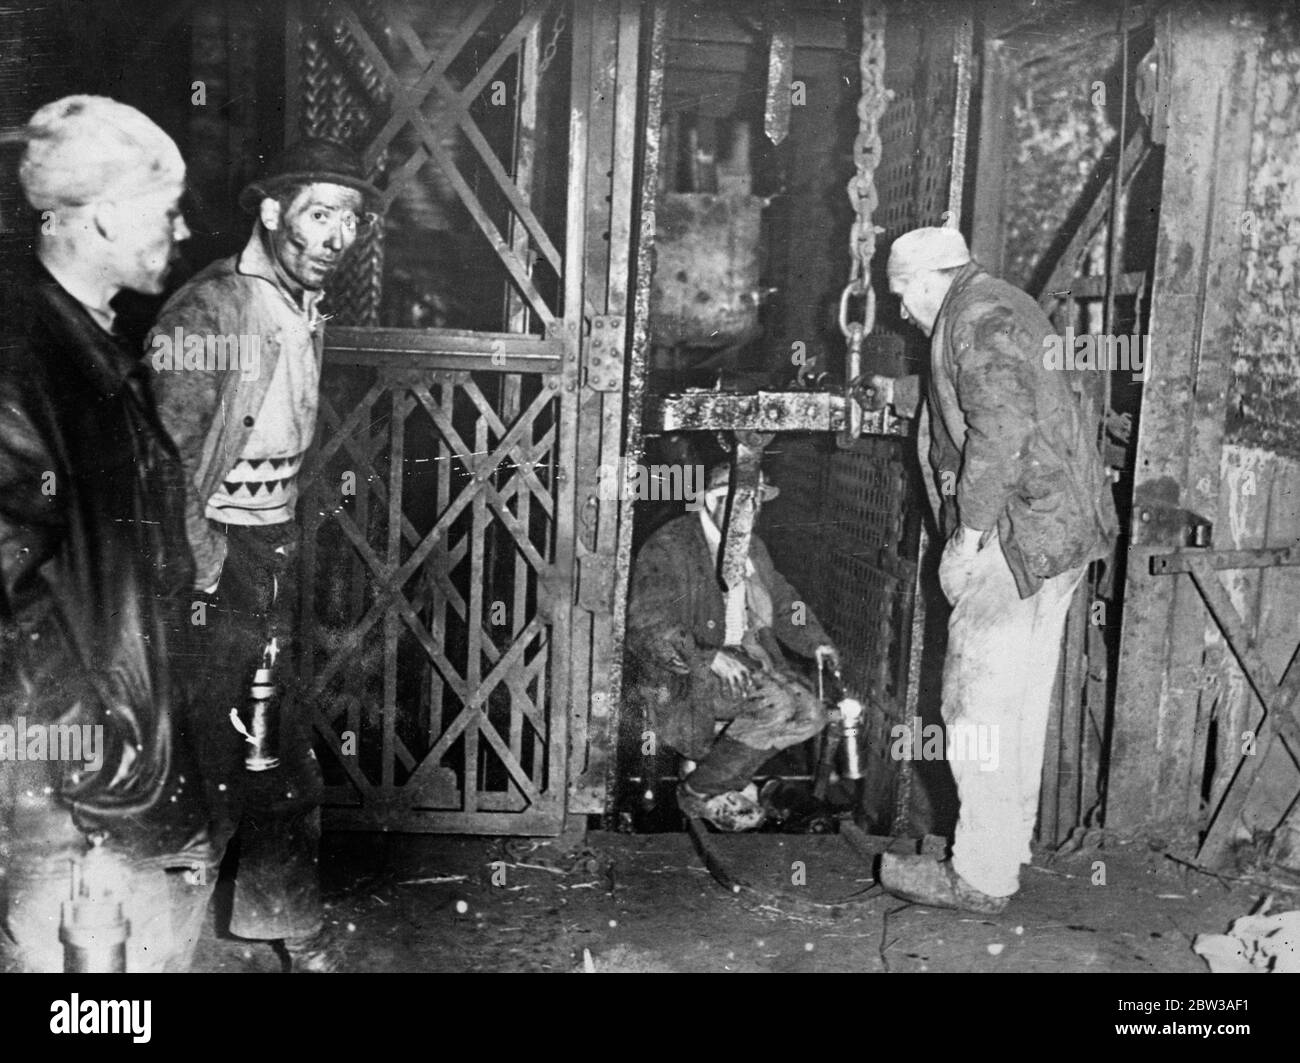 43 perish in Belgian mine disaster . Forty three men entomed when a disastrous explosion occured in a coal mine near Paturages , Belgium . The explosion occured in a gallery 2 , 700 feet underground . After the accident the mine was sealed . Photo shows bringing up a victim of the explosion . 17 May 1934 . Stock Photo